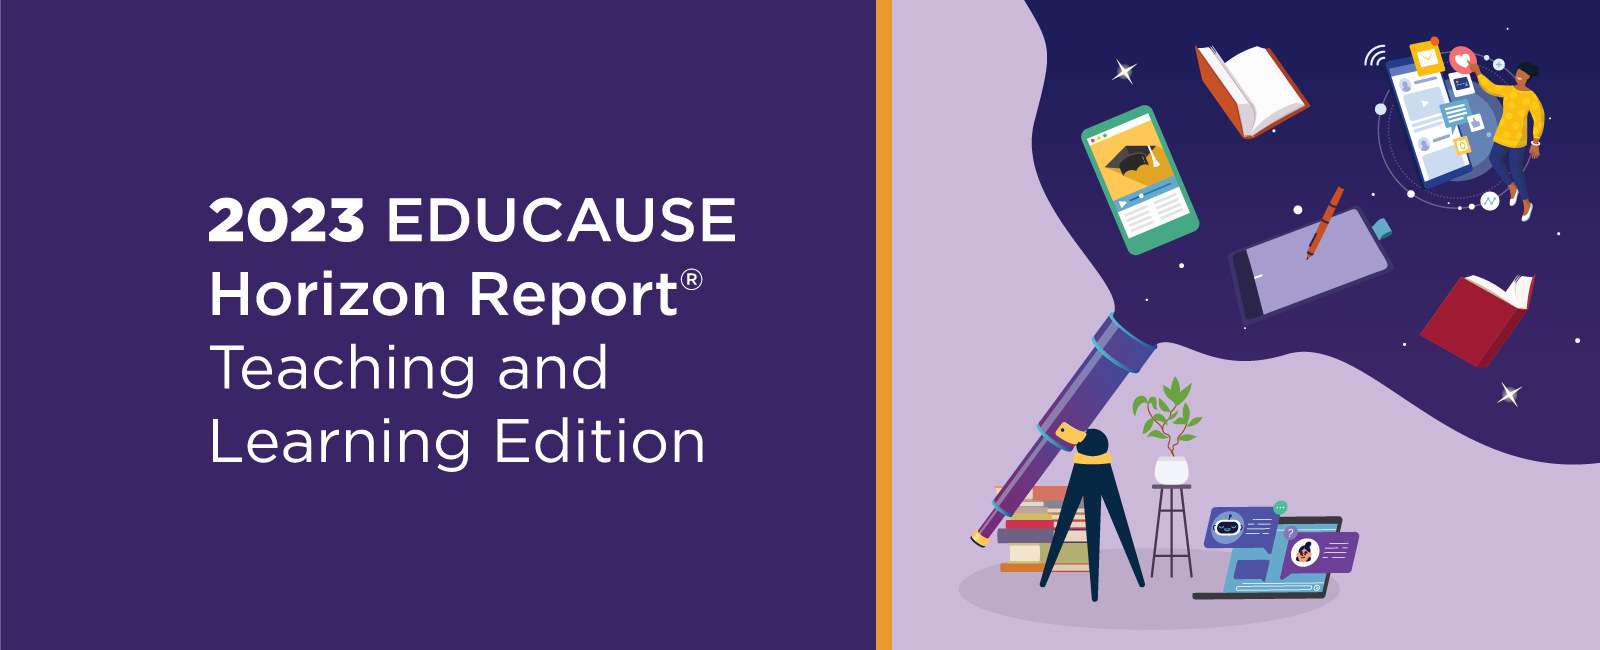 2023 EDUCAUSE Horizon Report | Teaching and Learning Edition